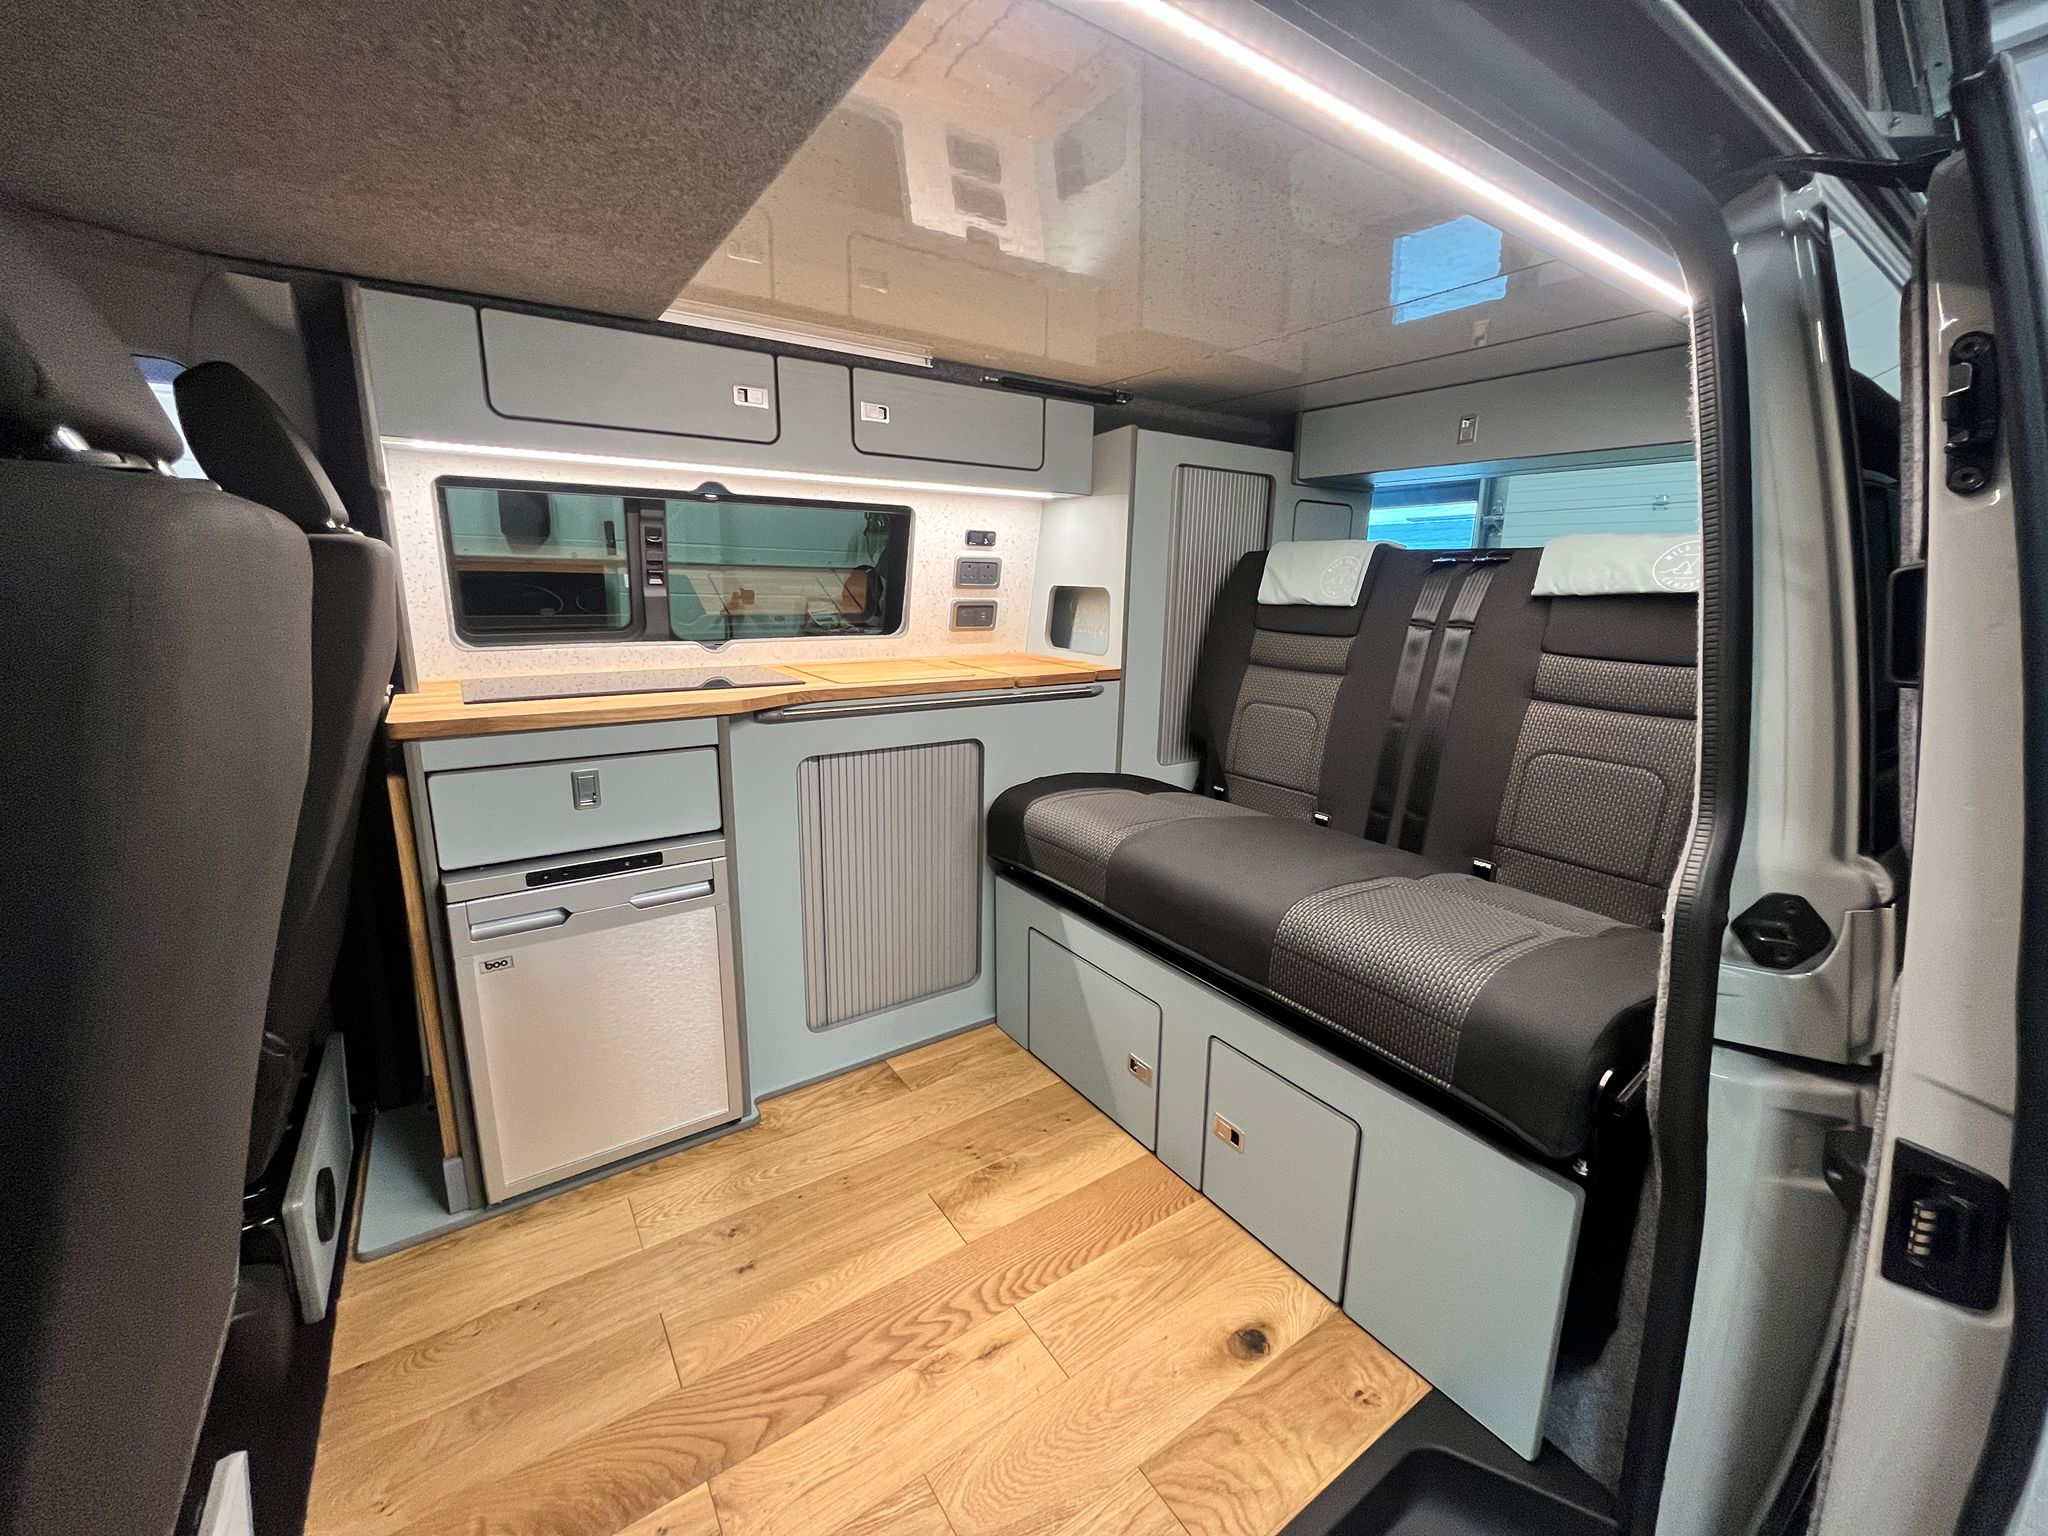 VW T5/6 Deluxe Furniture Kit - Coolwhip Campervan Conversions